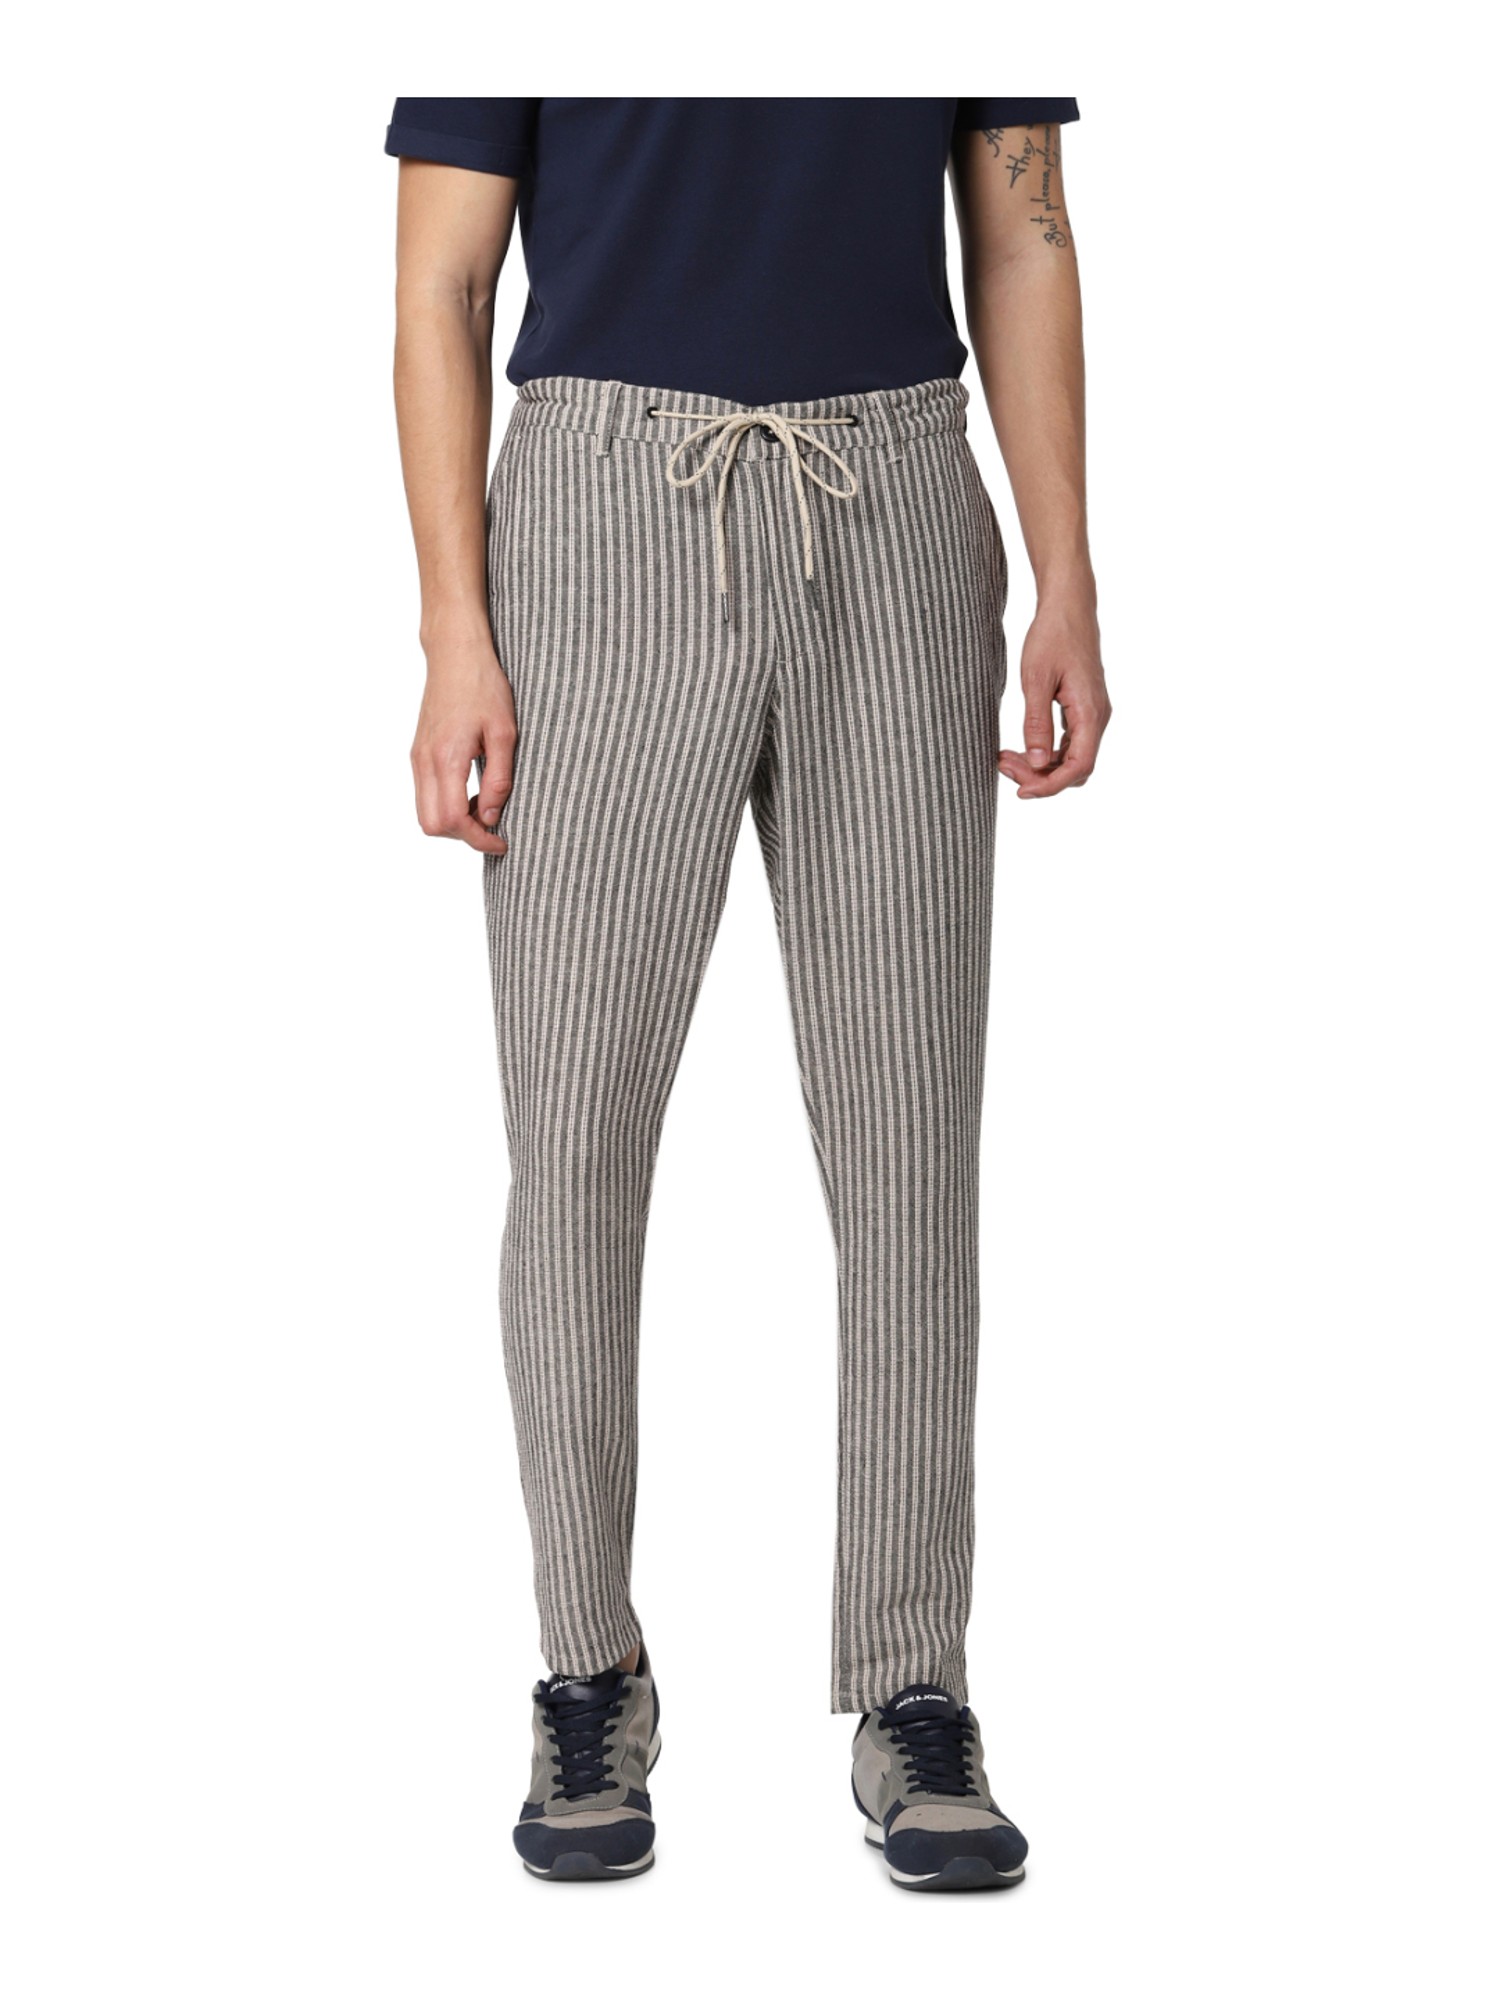 Dolce & Gabbana Double-pleated Barcode Striped Pants men - Glamood Outlet